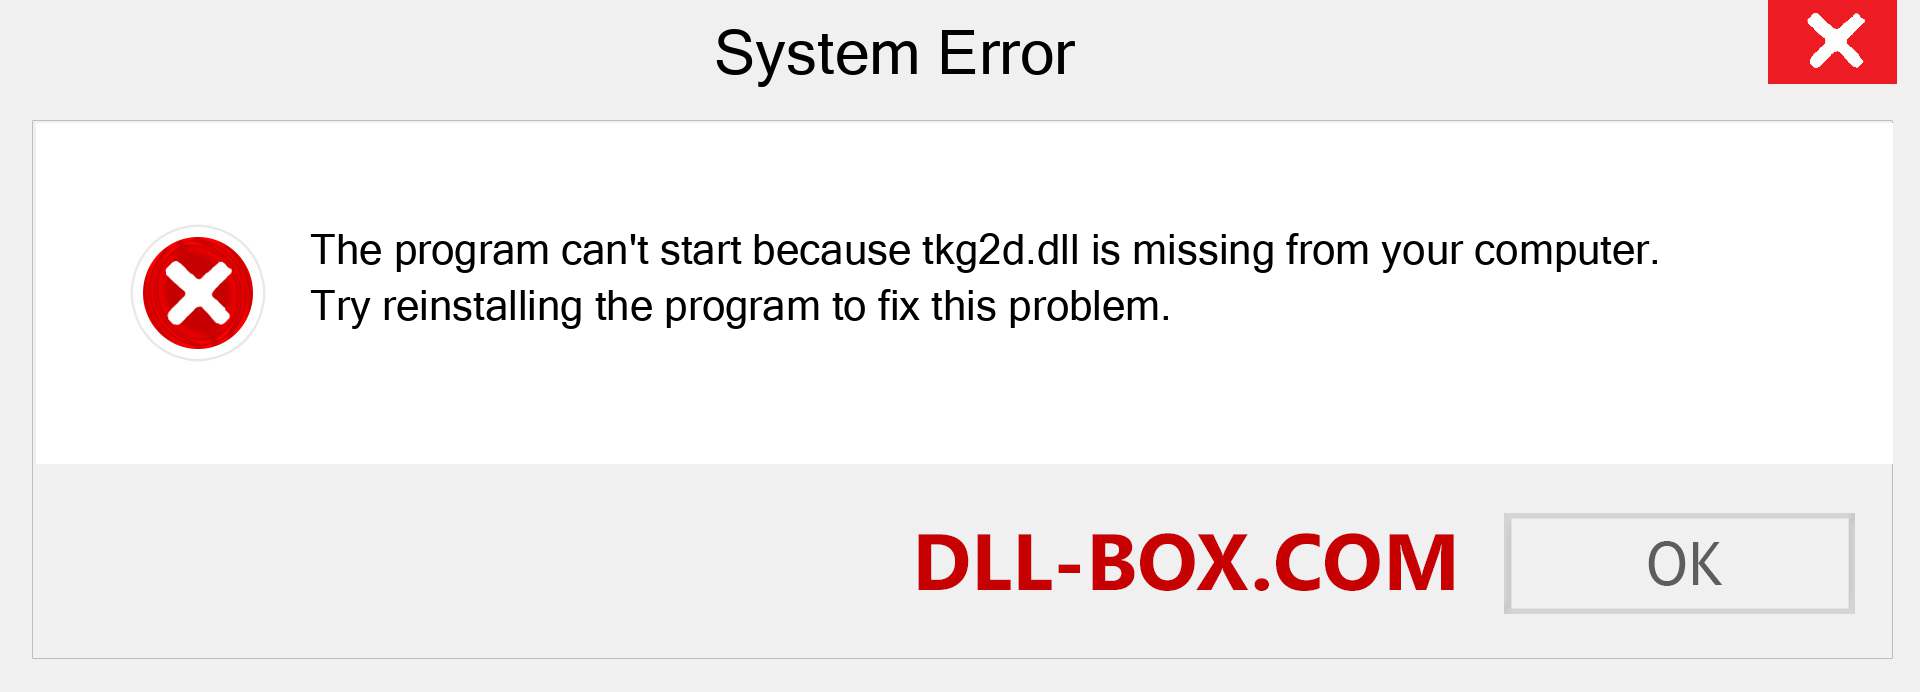  tkg2d.dll file is missing?. Download for Windows 7, 8, 10 - Fix  tkg2d dll Missing Error on Windows, photos, images